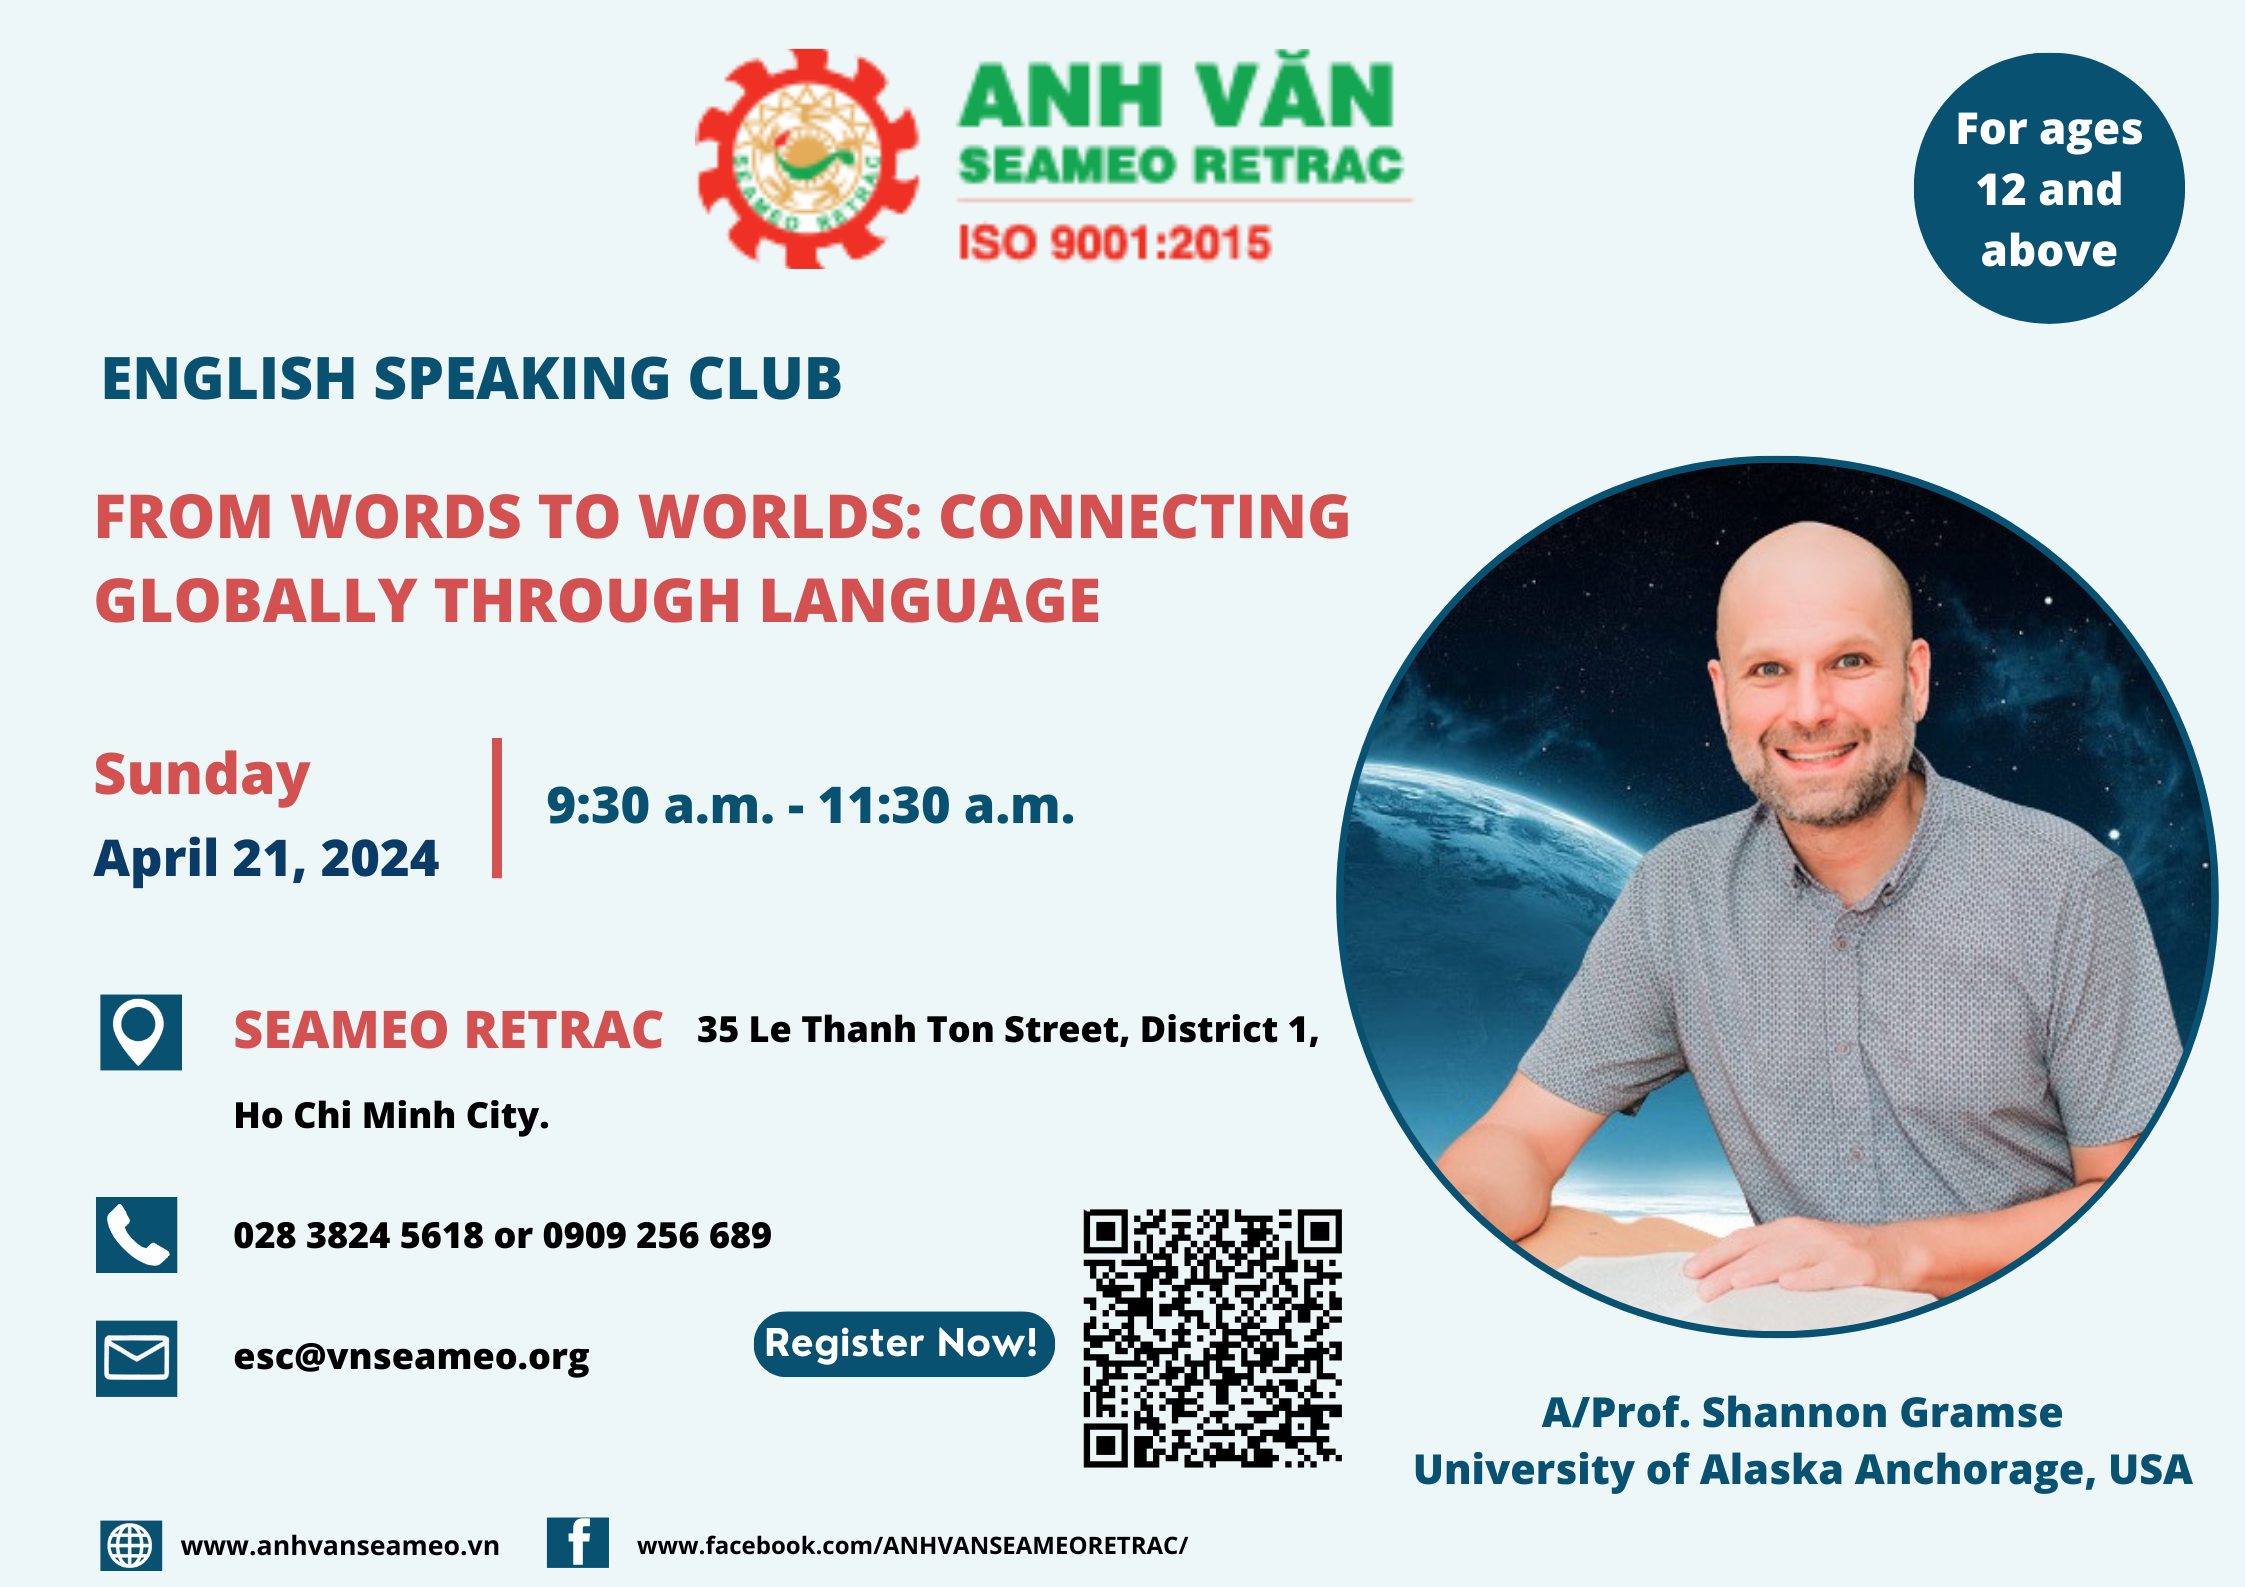 English Speaking Club: Topic: “From Words to Worlds: Connecting Globally Through Language”